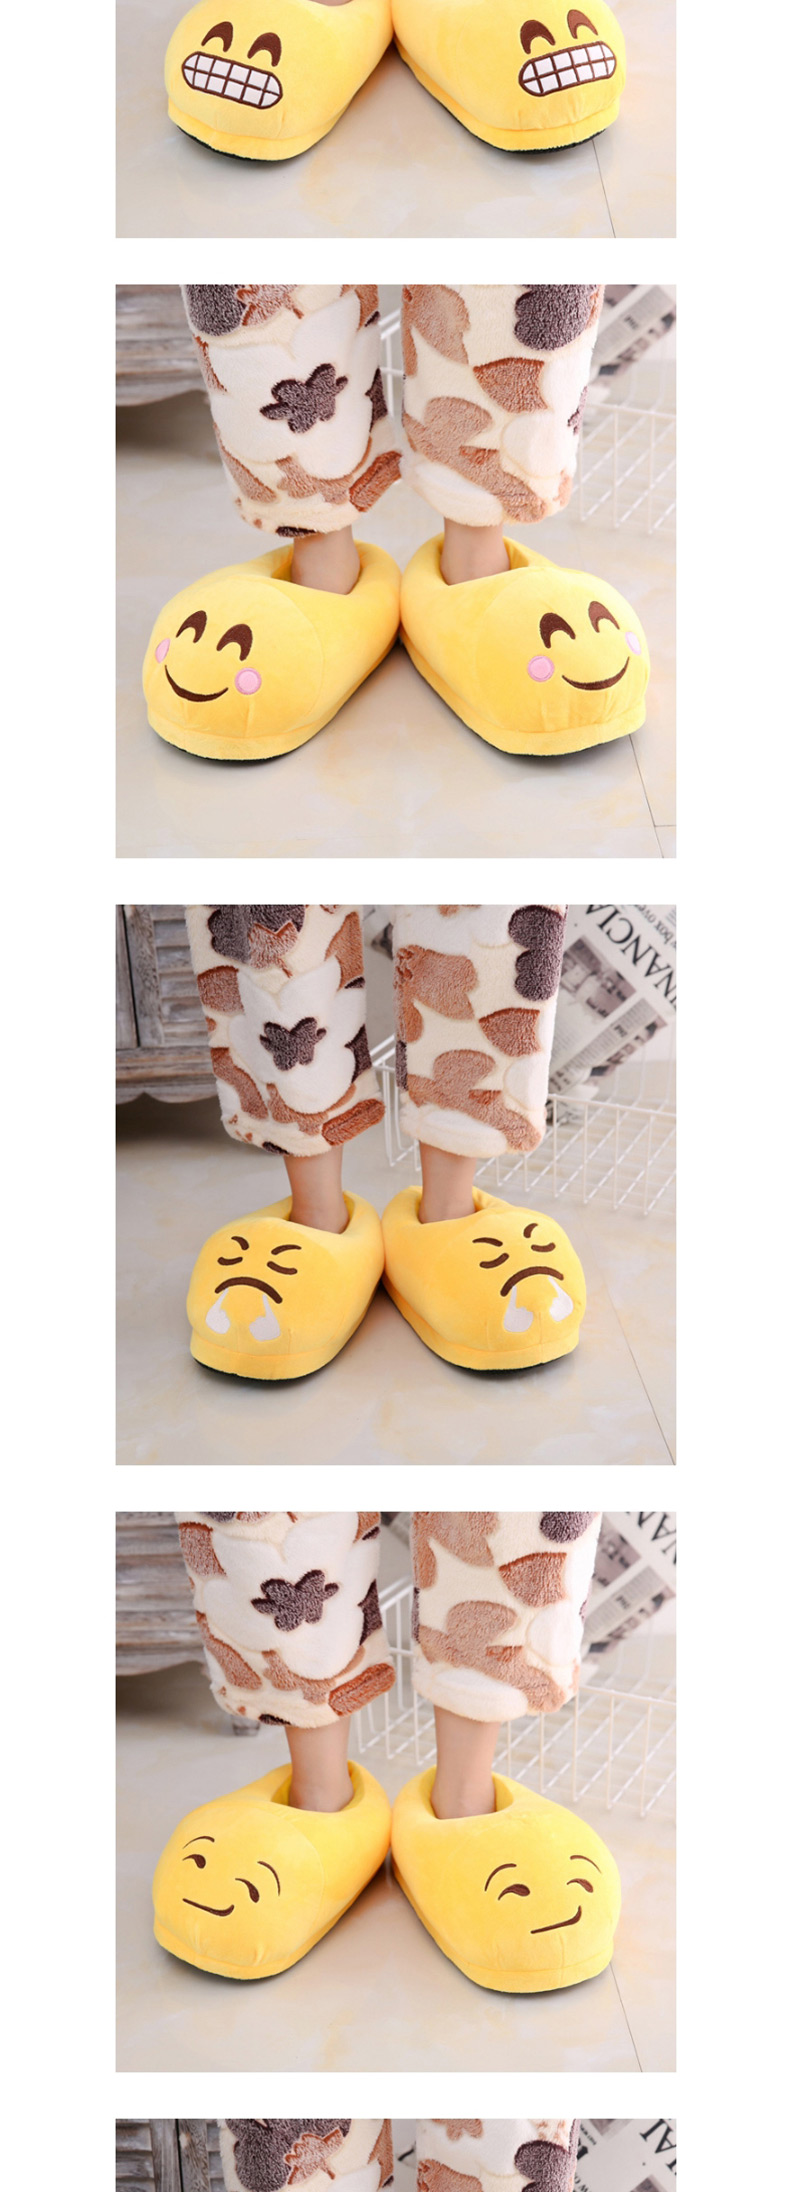 Fashion 1 Yellow Big Love Cartoon Expression Plush Bag With Cotton Slippers,Slippers